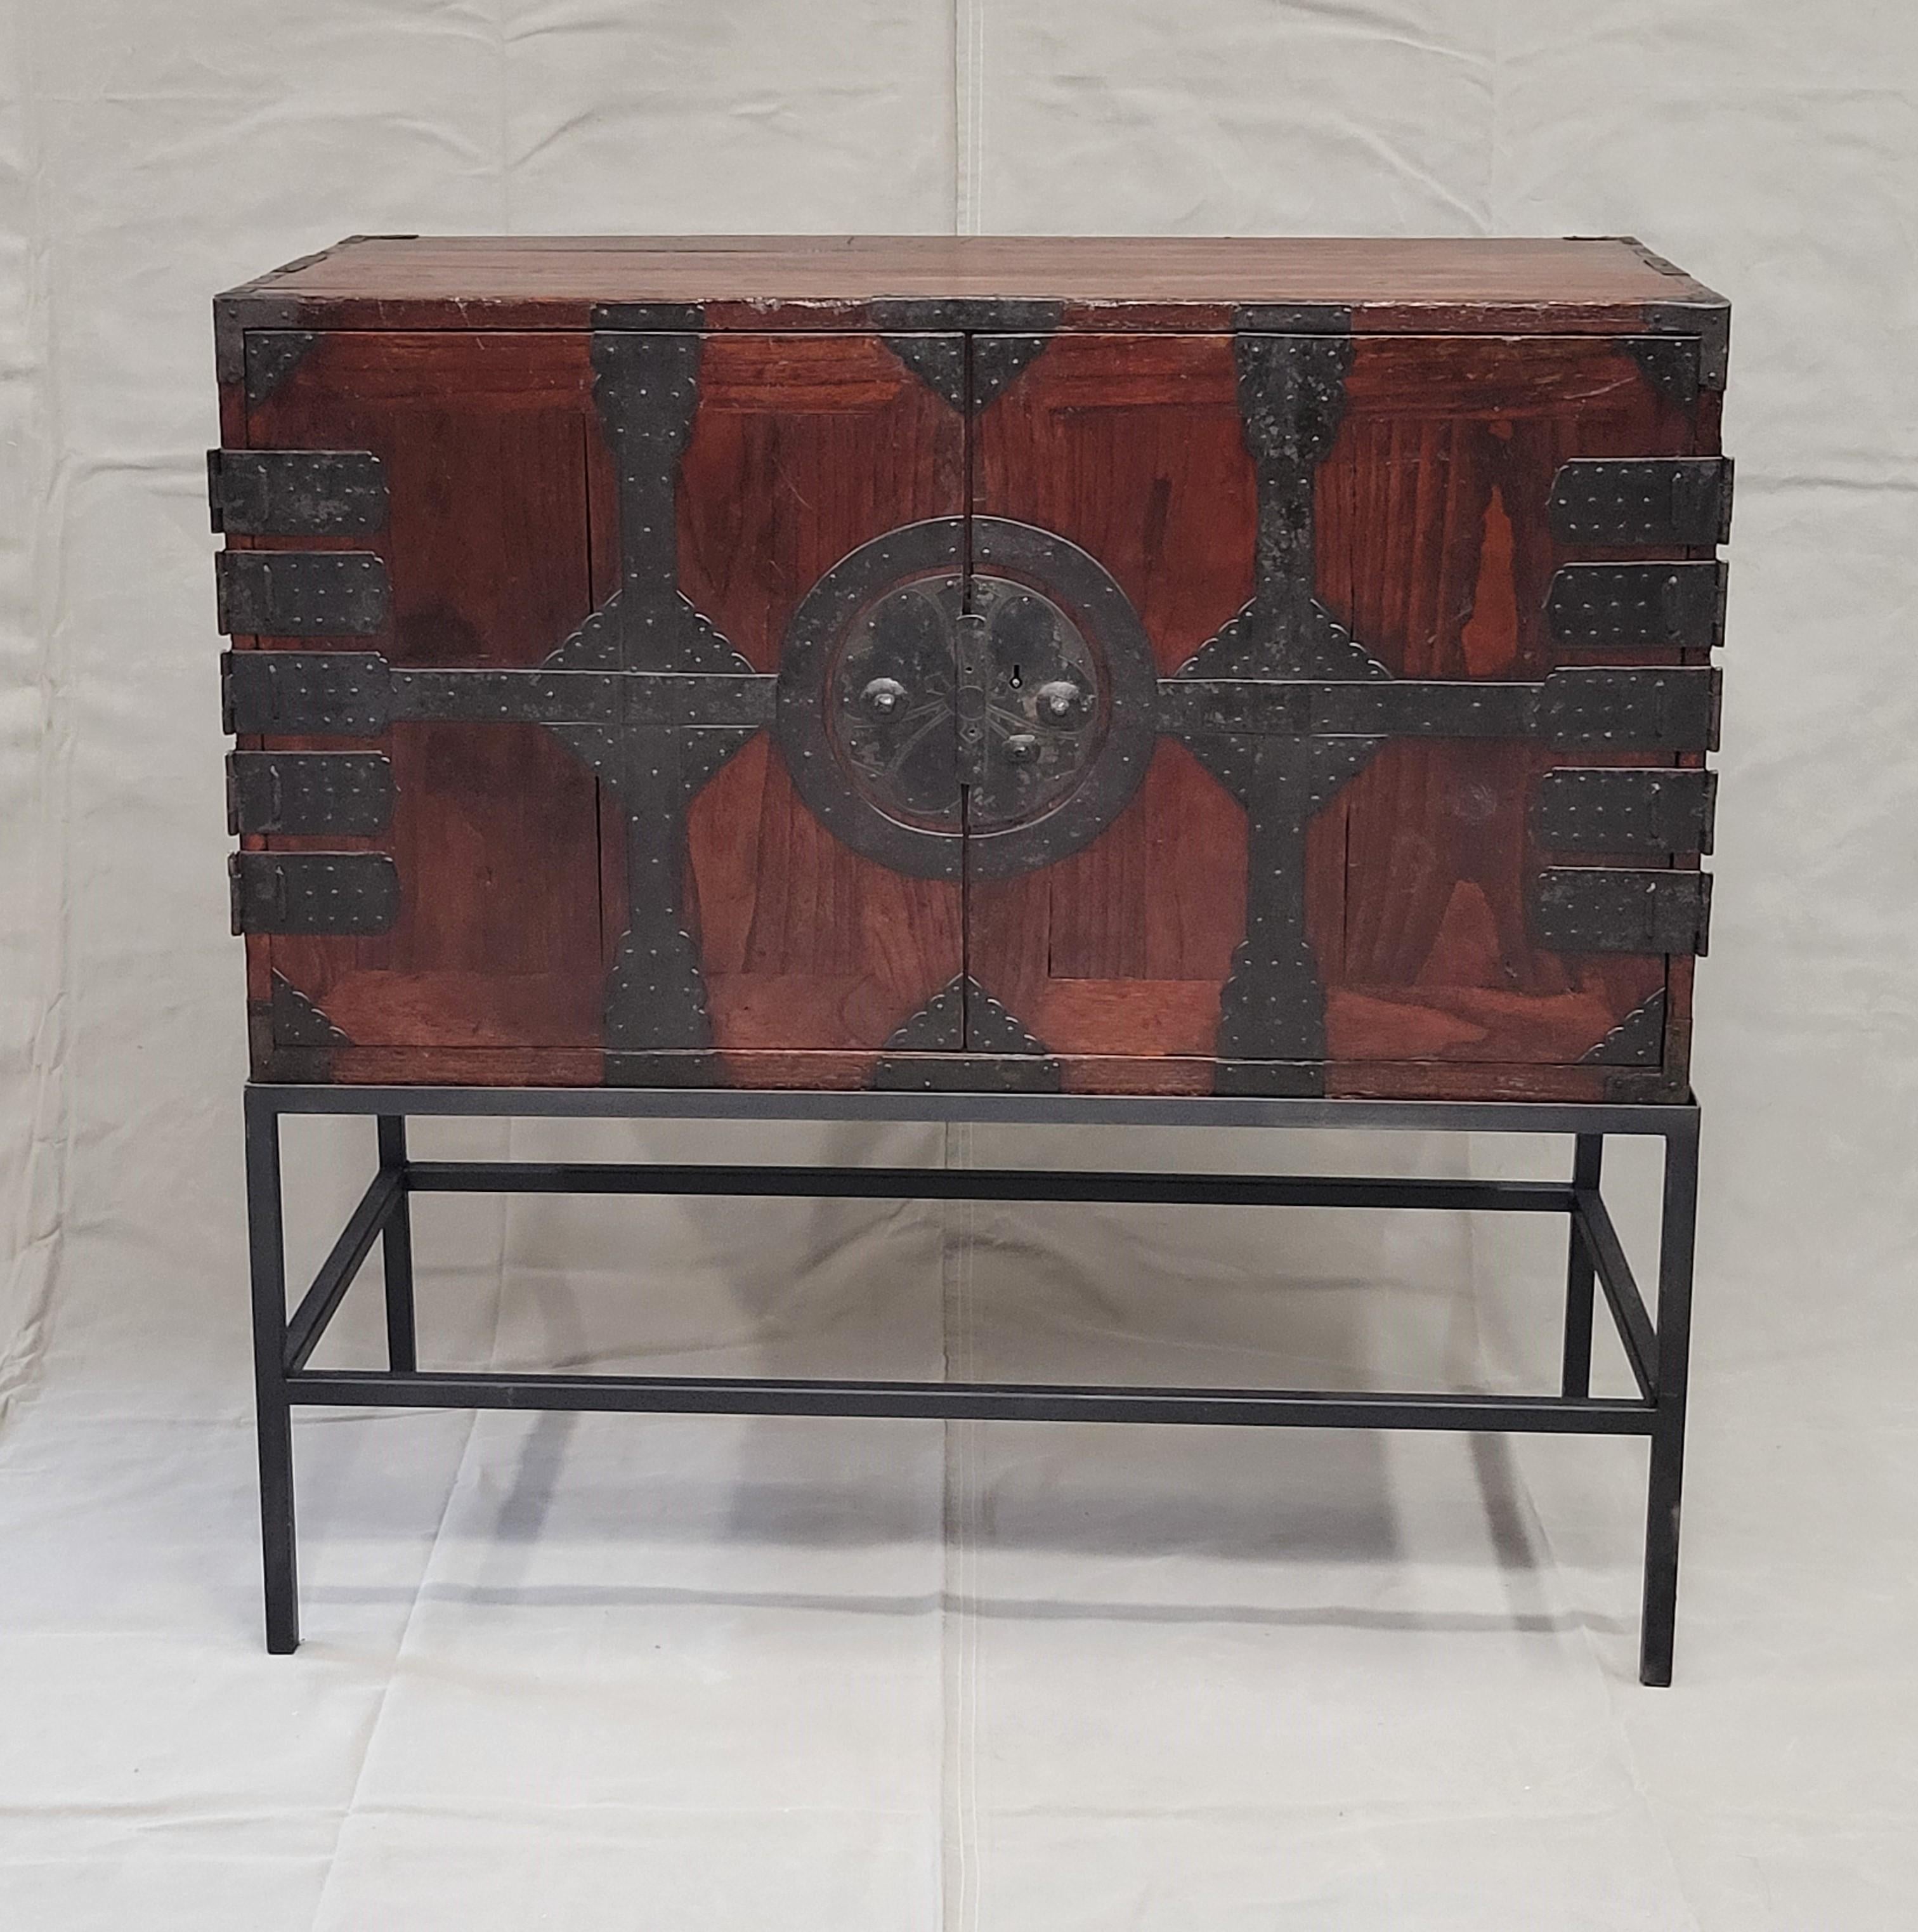 A stunning and unique antique Japanese tansu chest with two interior drawers that sits on a custom made contemporary black metal stand. The tansu chest was part of a larger cabinet which was lost at some point in time. The black iron hardware on the